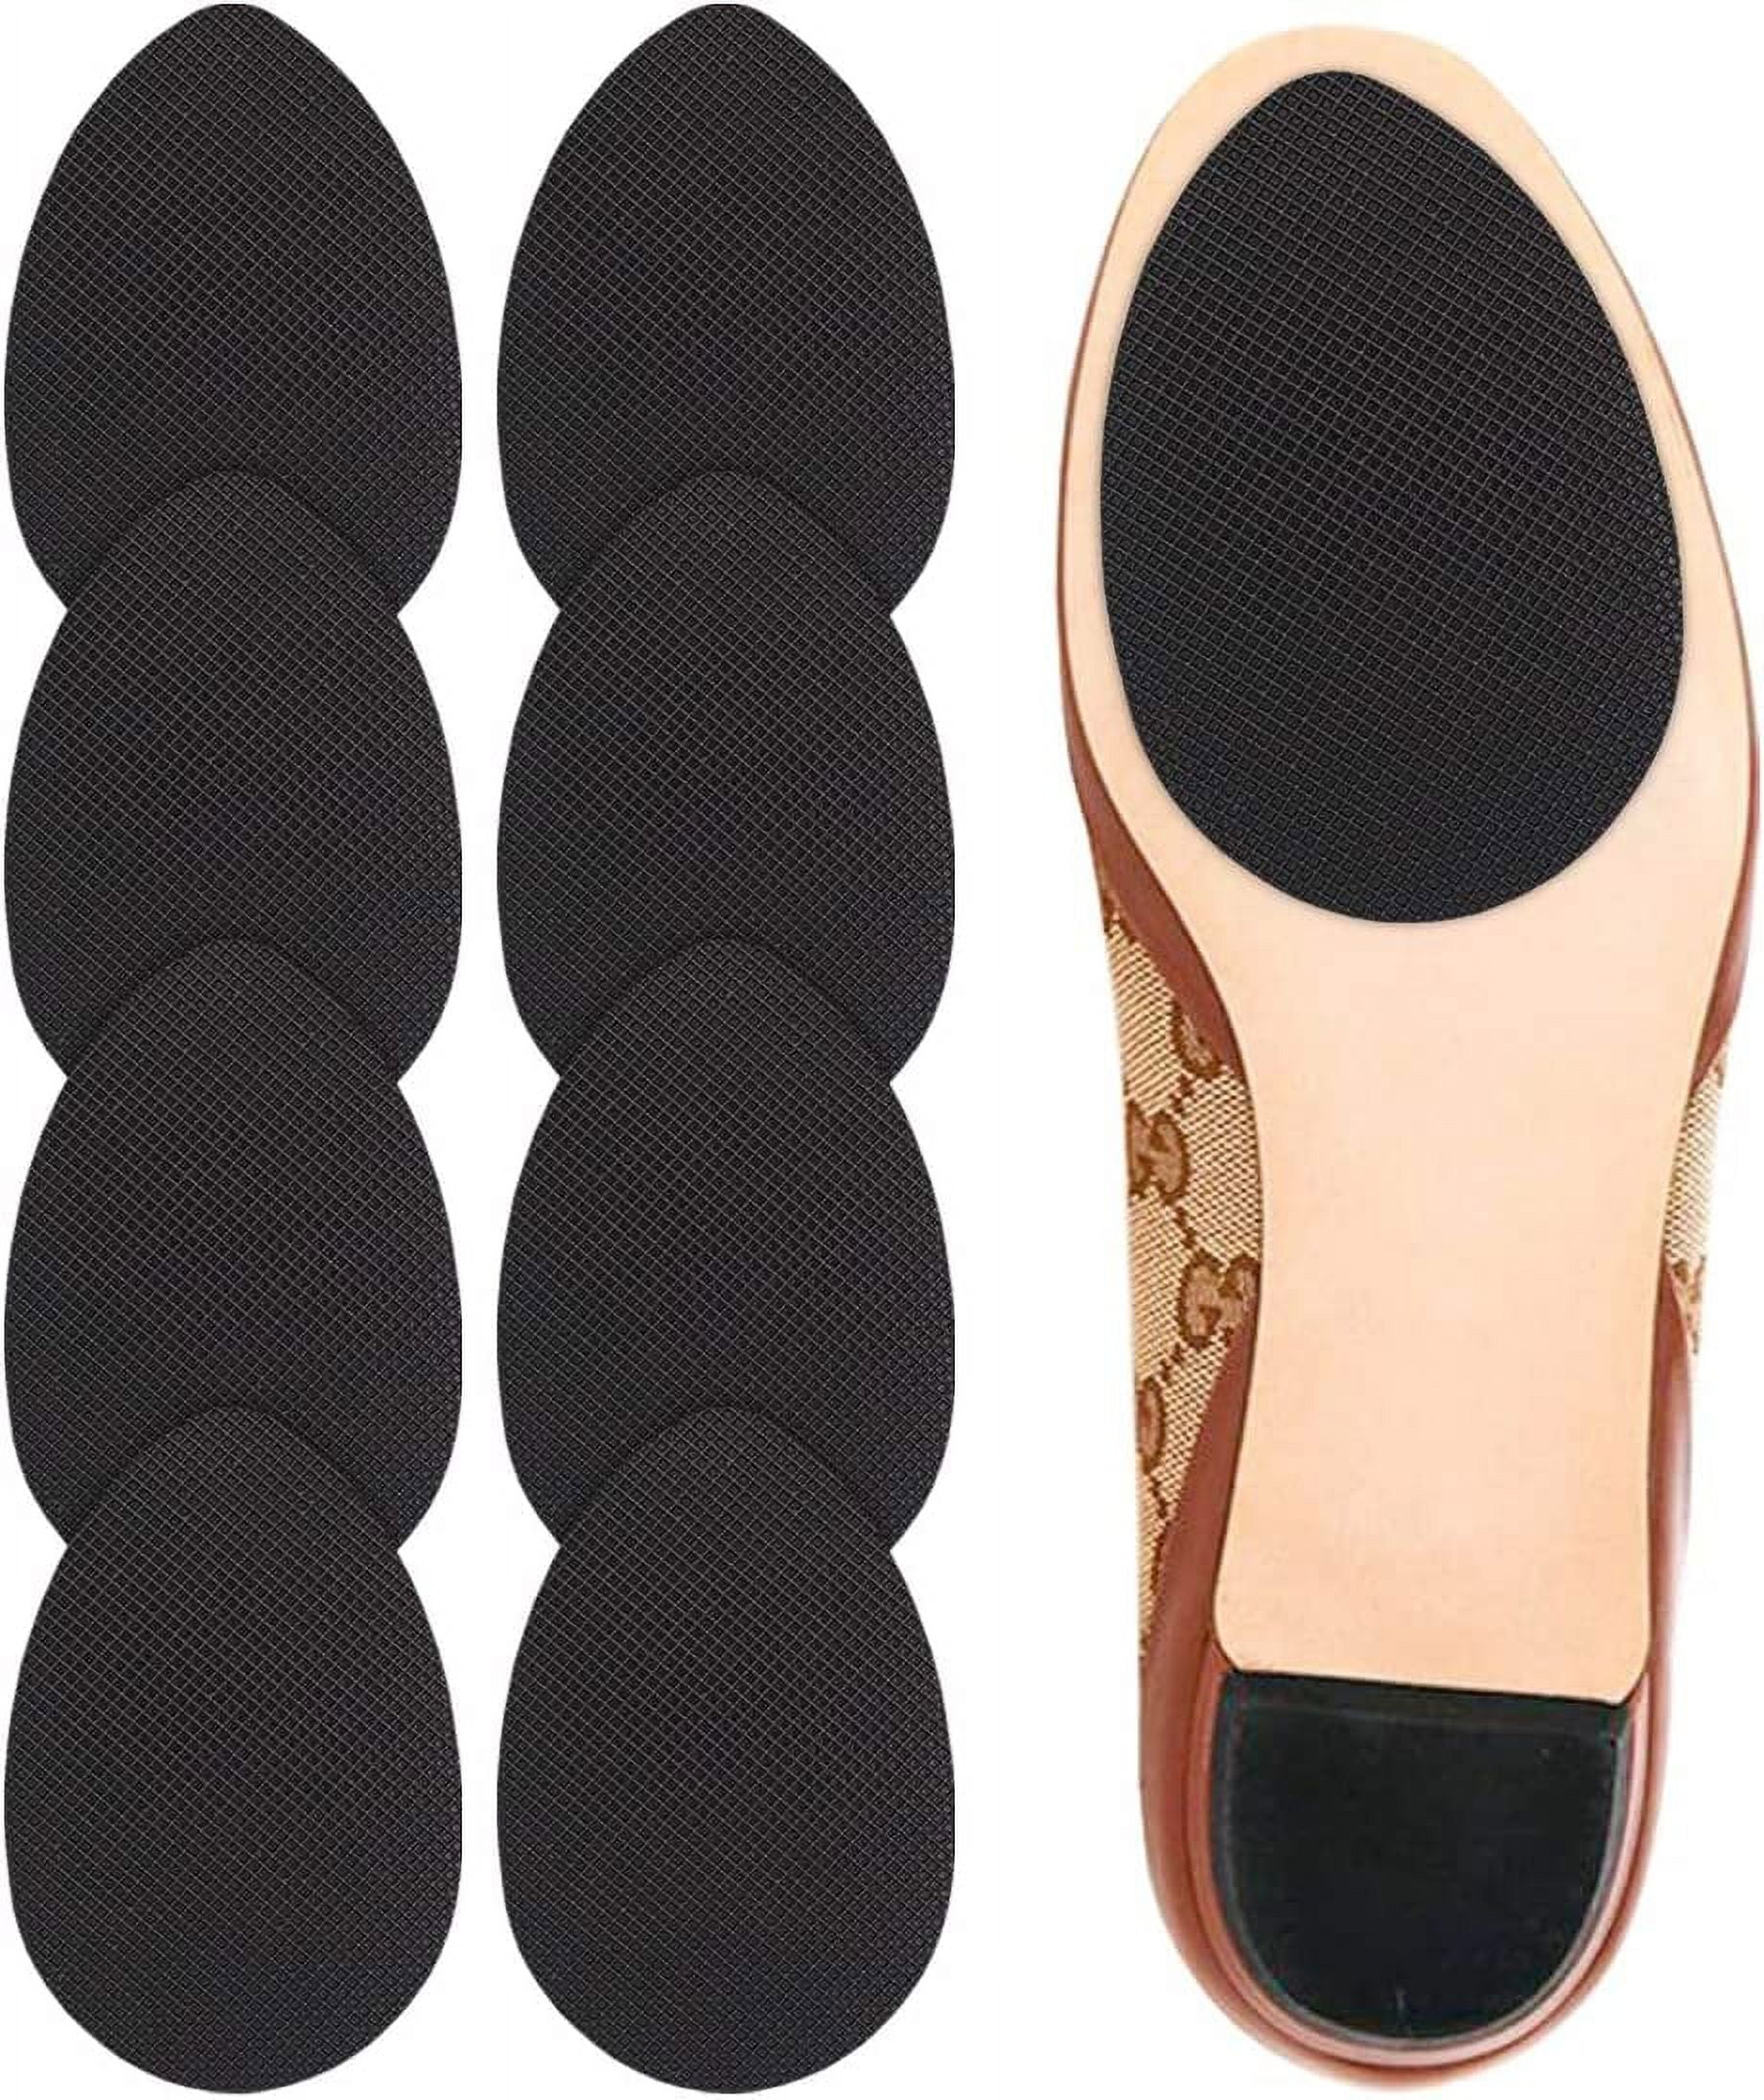 Stay Safe and Steady with Non Slip shoe Pads for High Heels and Shoes 4 Pairs of Black Shoe Grips on Bottom Shoe Sole Protector f75bde03 0027 4d8f afea 1be6ea4a221d.490c5aec1f61b8511a19a4a27b08a97c